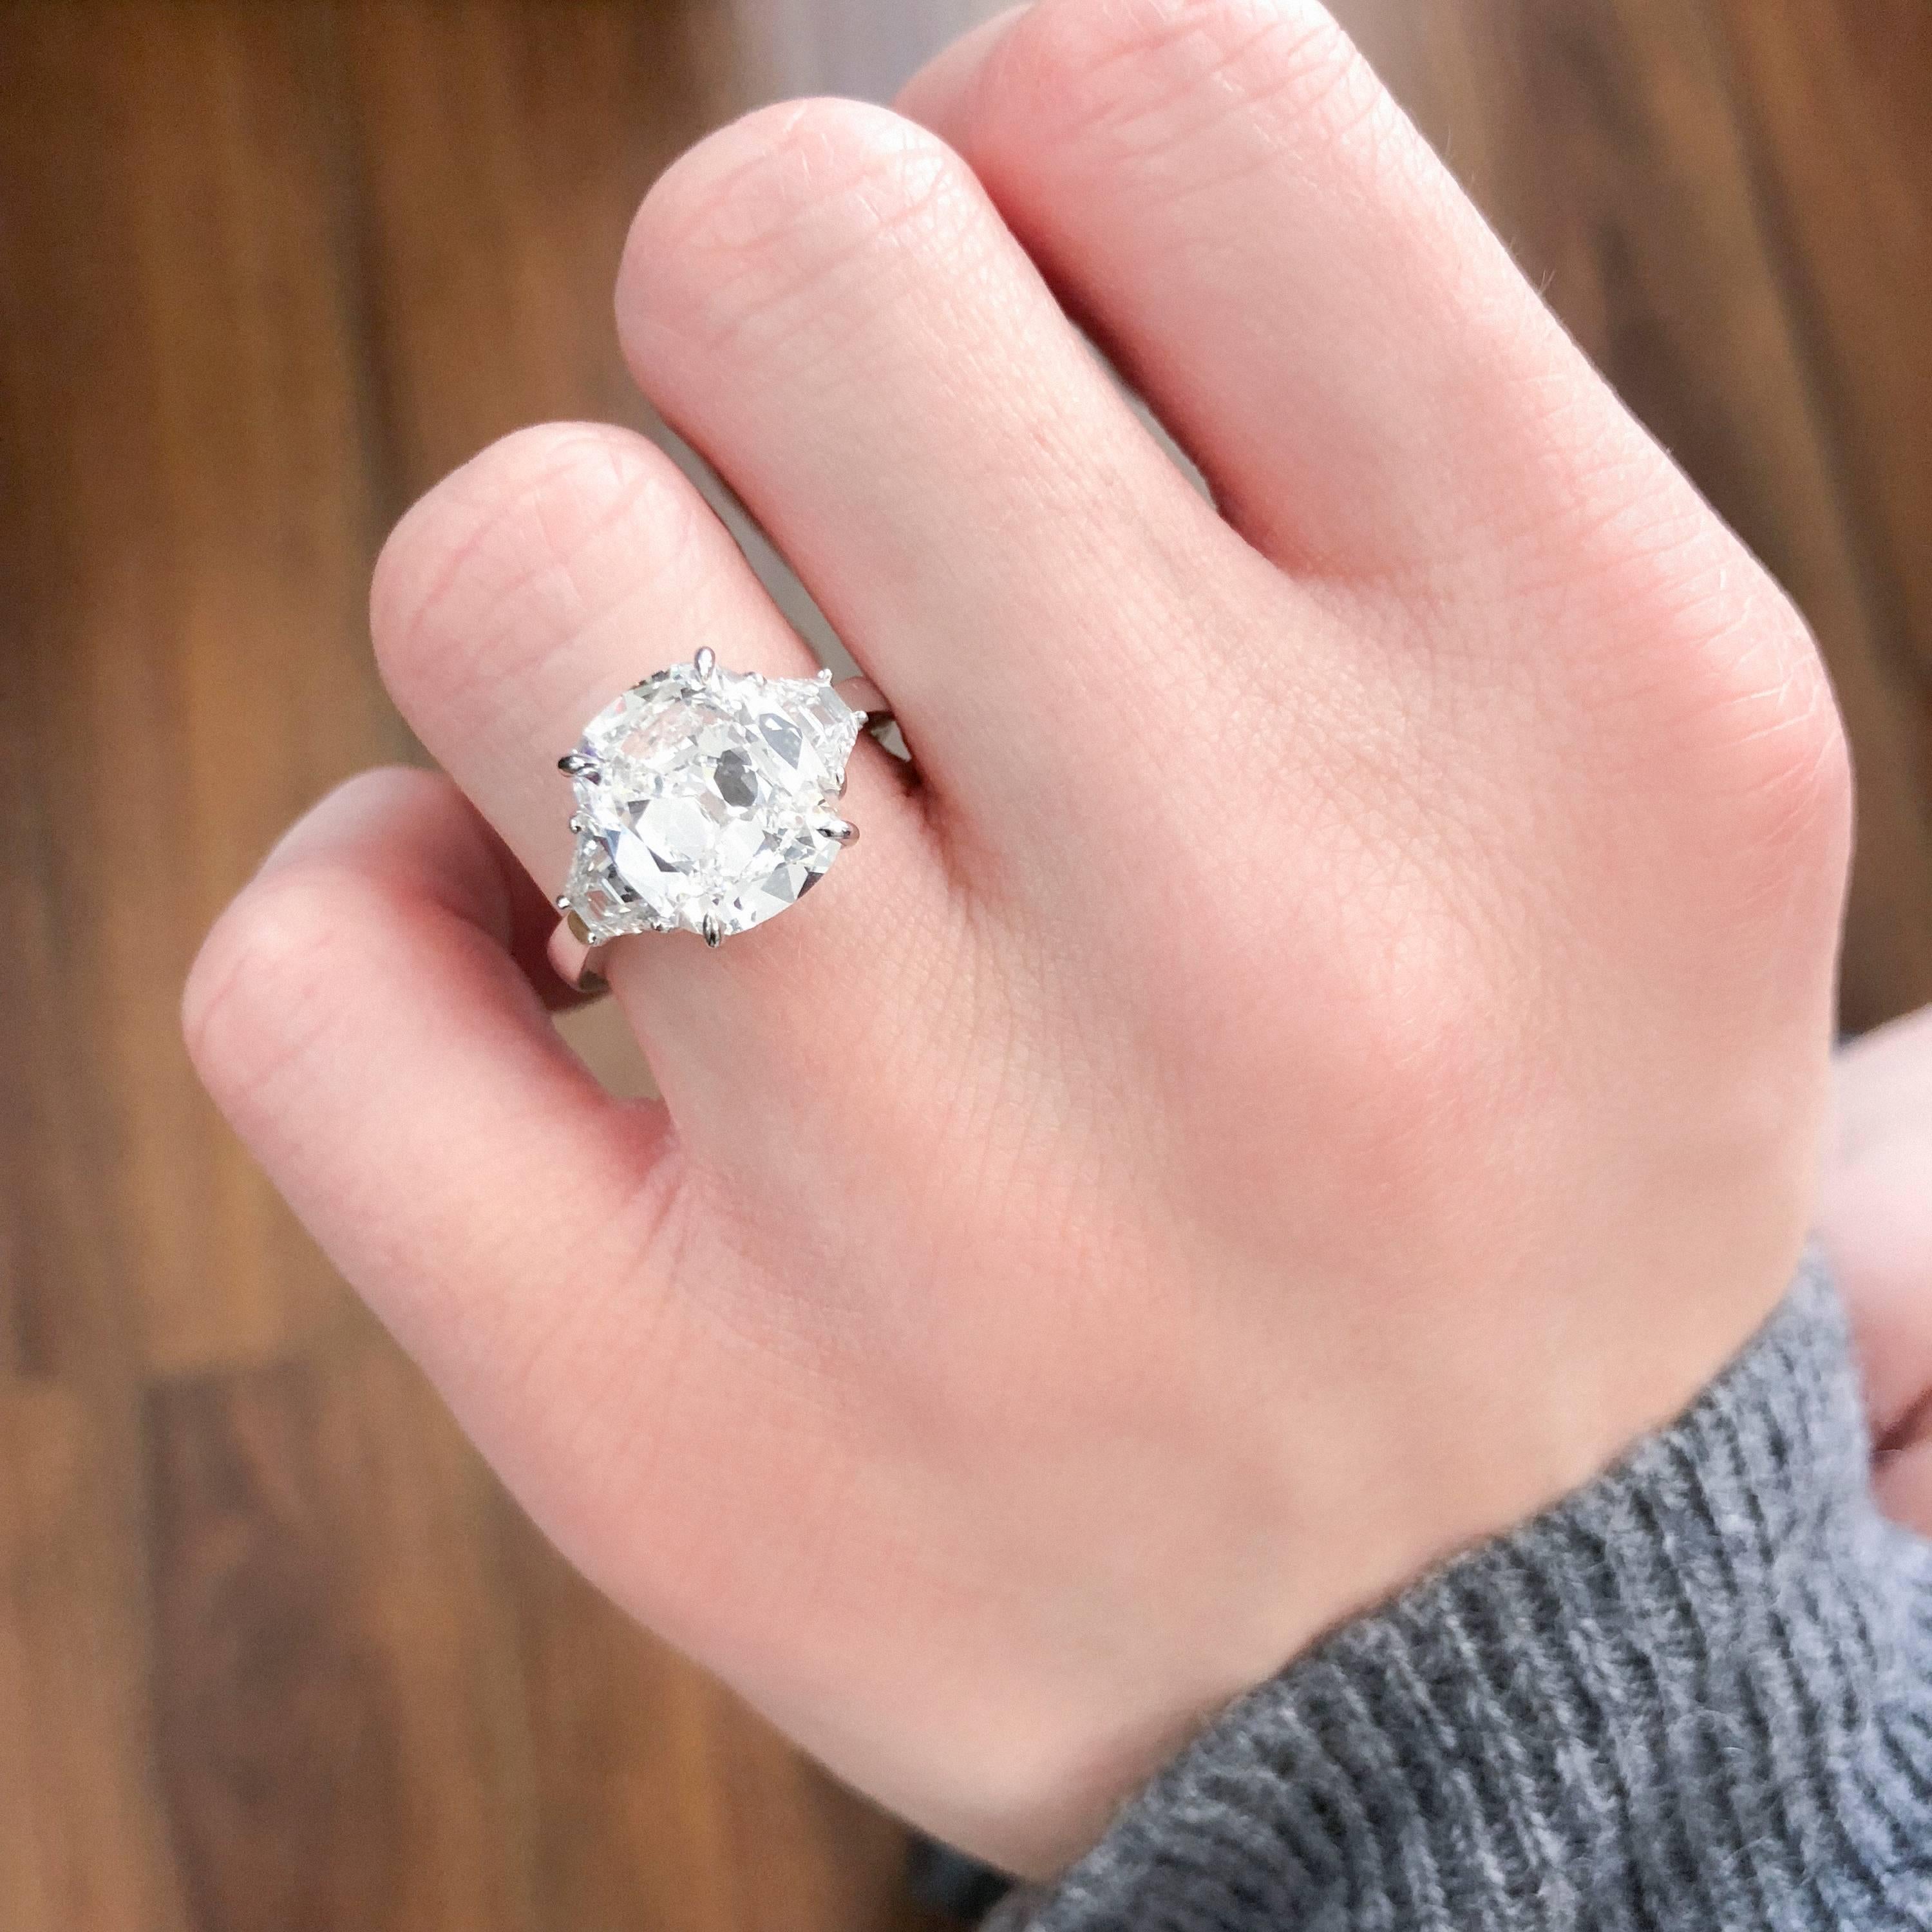 4.01 ct D VS2 cushion brilliant diamond with GIA certificate
0.72 tw trapezoid sidestones
Platinum size 6
A true cushion brilliant with beautiful faceting - NOT the crushed ice look. 